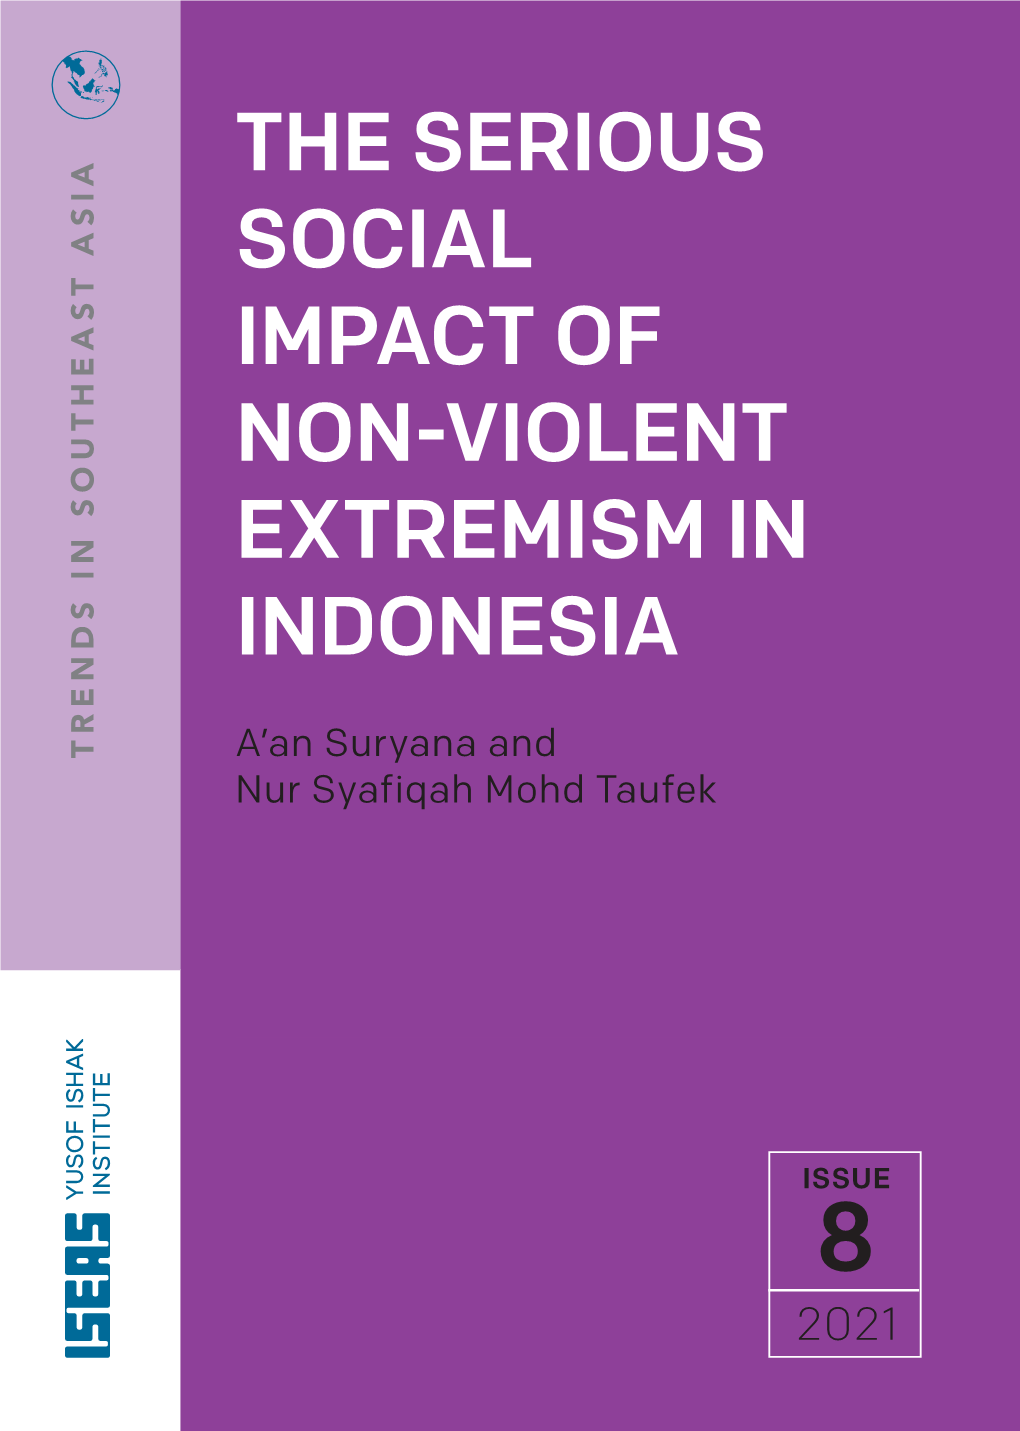 The Serious Social Impact of Non-Violent Extremism in Indonesia